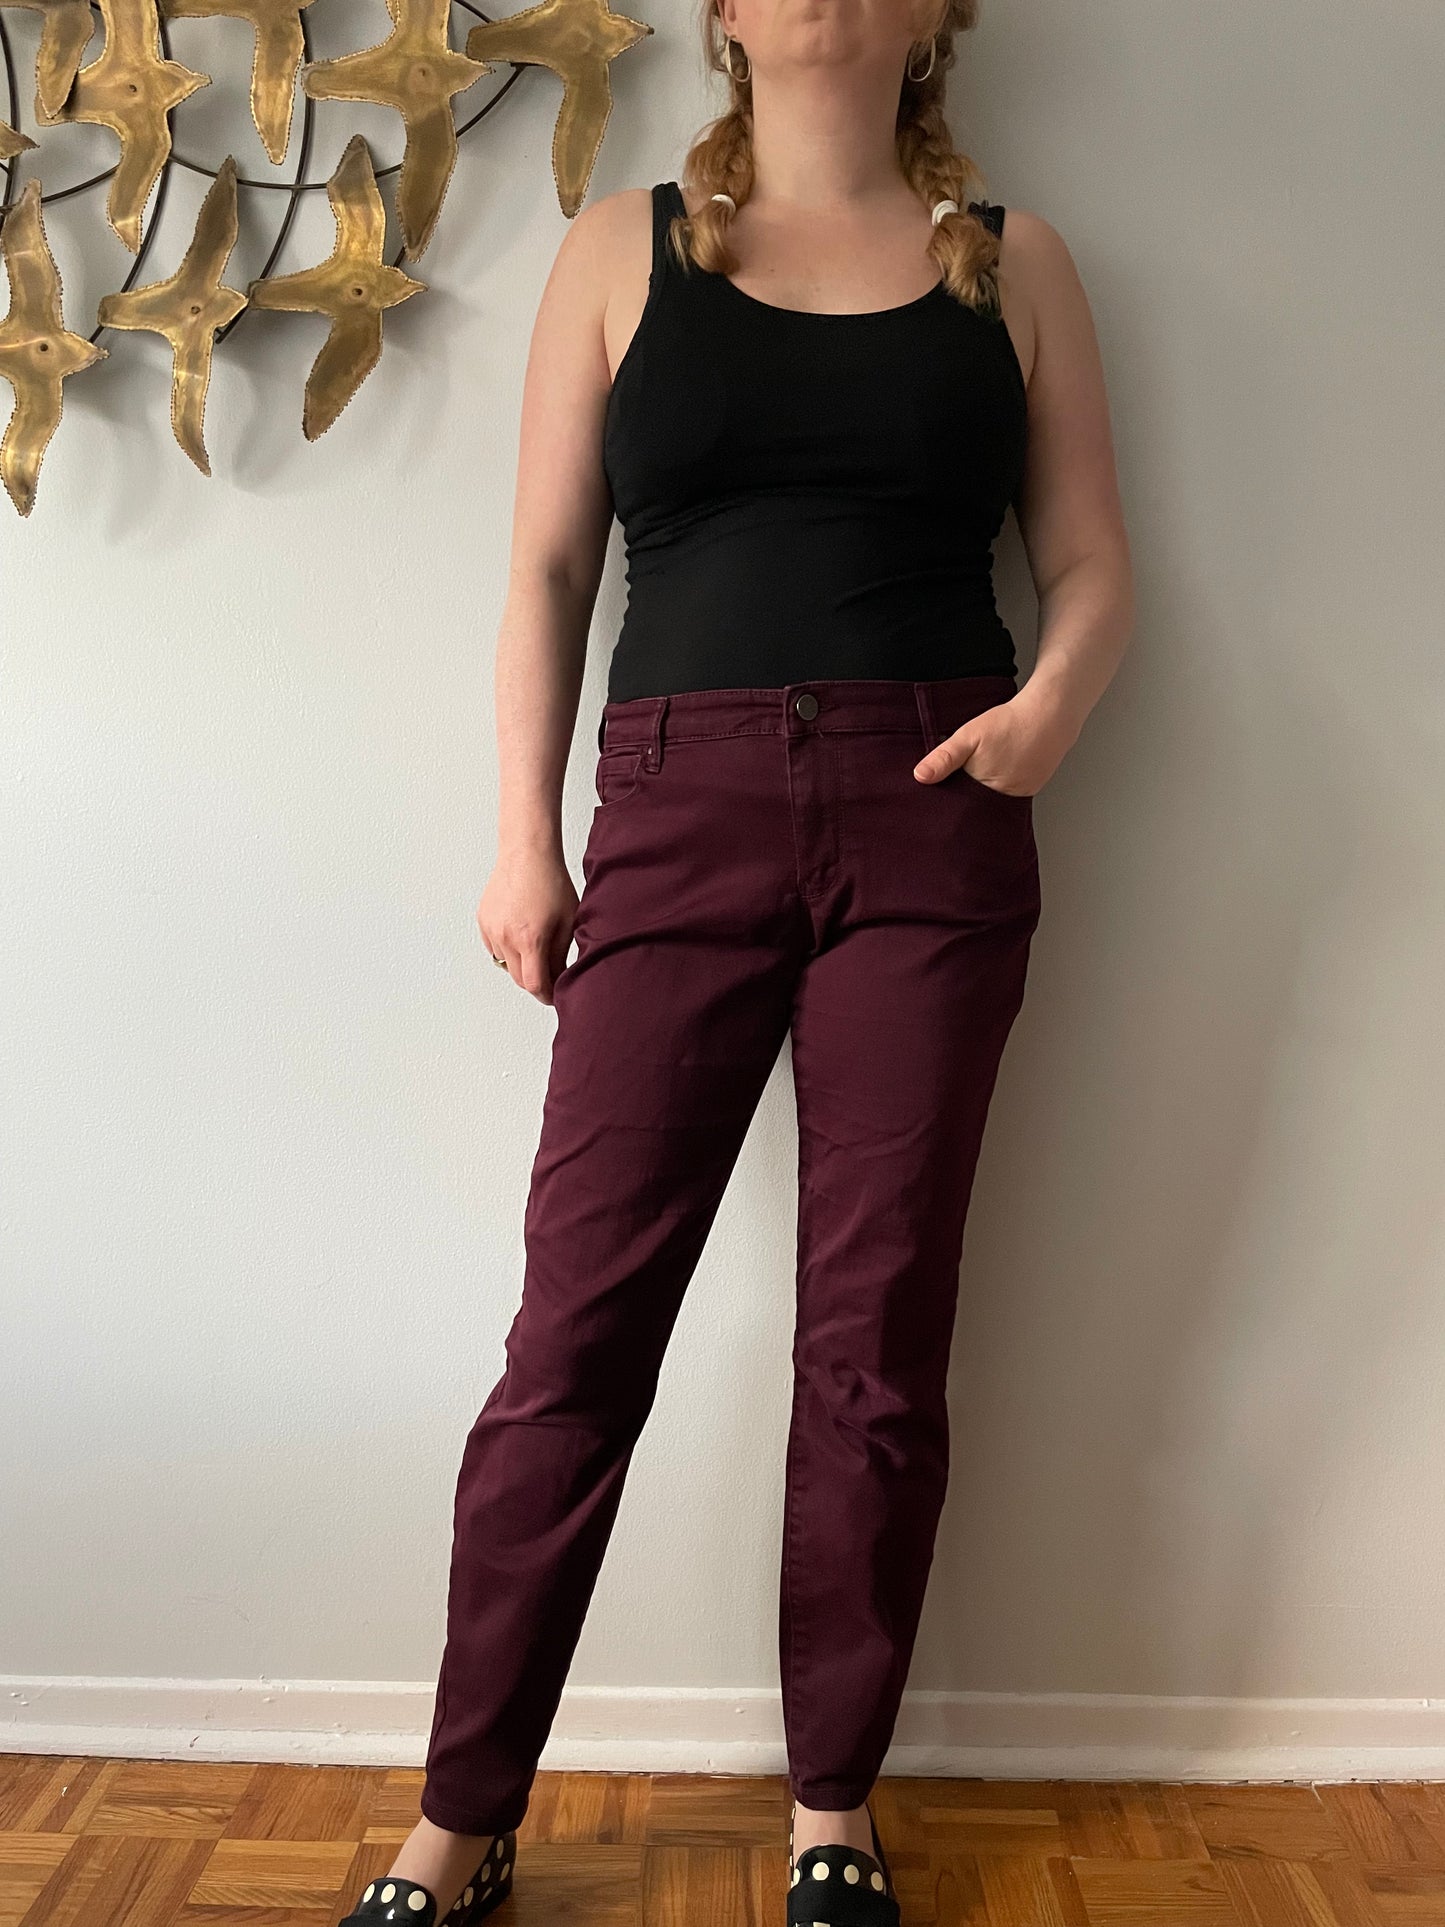 R Jeans Wine Red Slim Stretch Pants - Size 31